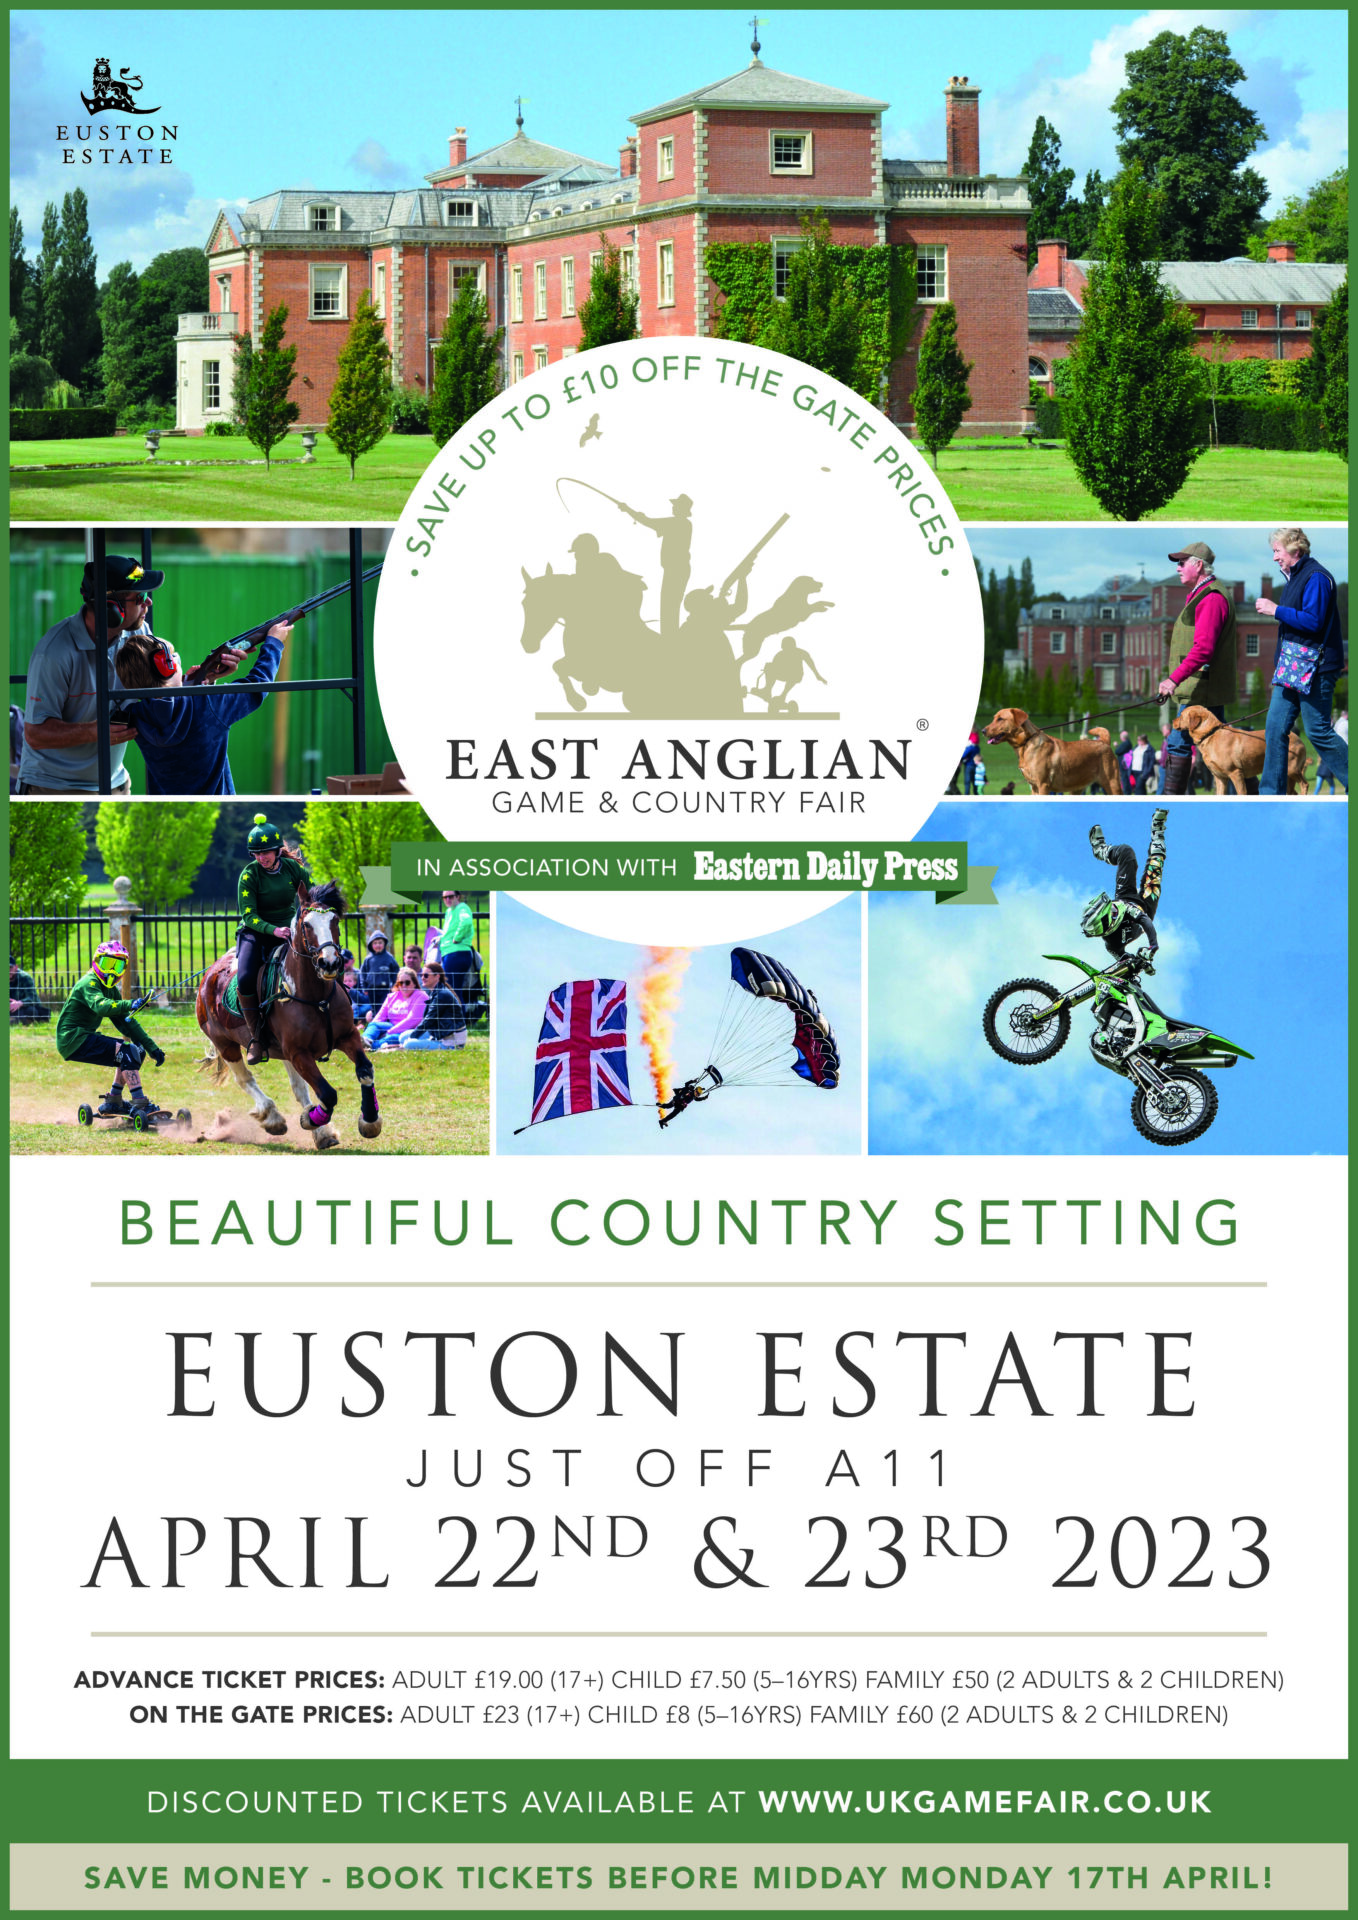 The East Anglian Game and Country Fair Raring2go!